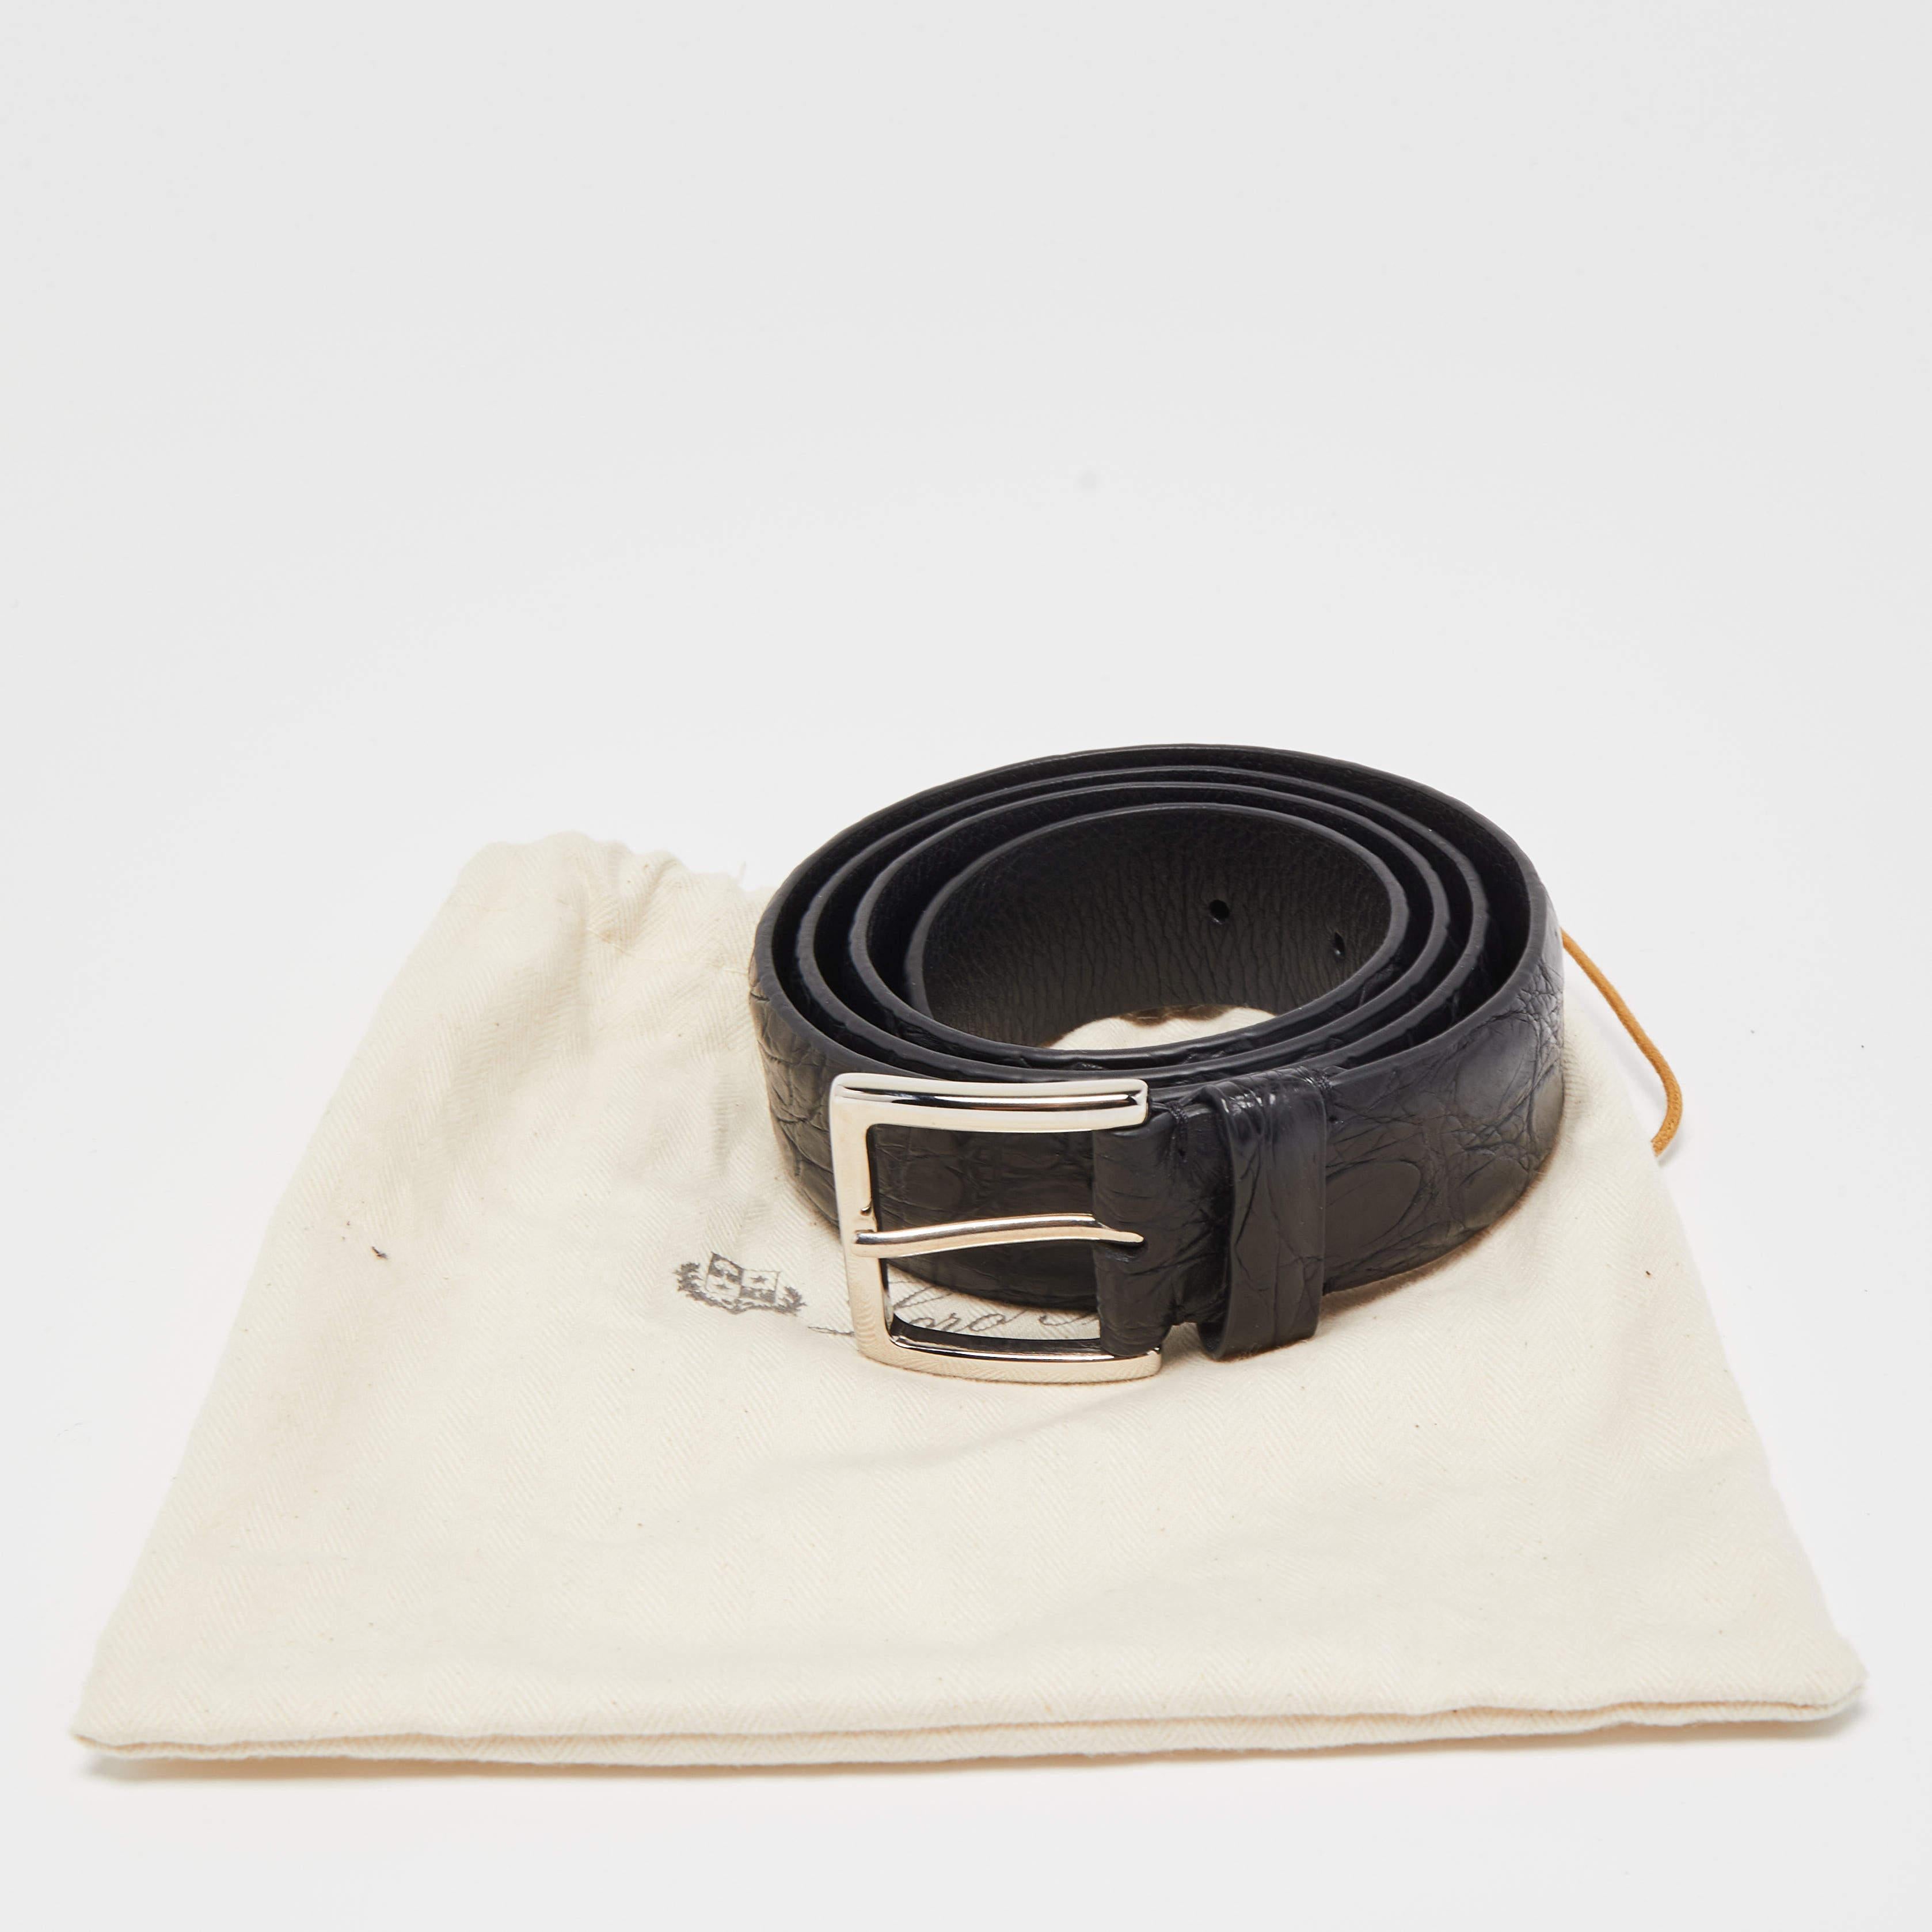 Add a sleek finish to your OOTD with this Loro Piana alligator leather belt. It is carefully crafted to last well and boost your style for a long time.

